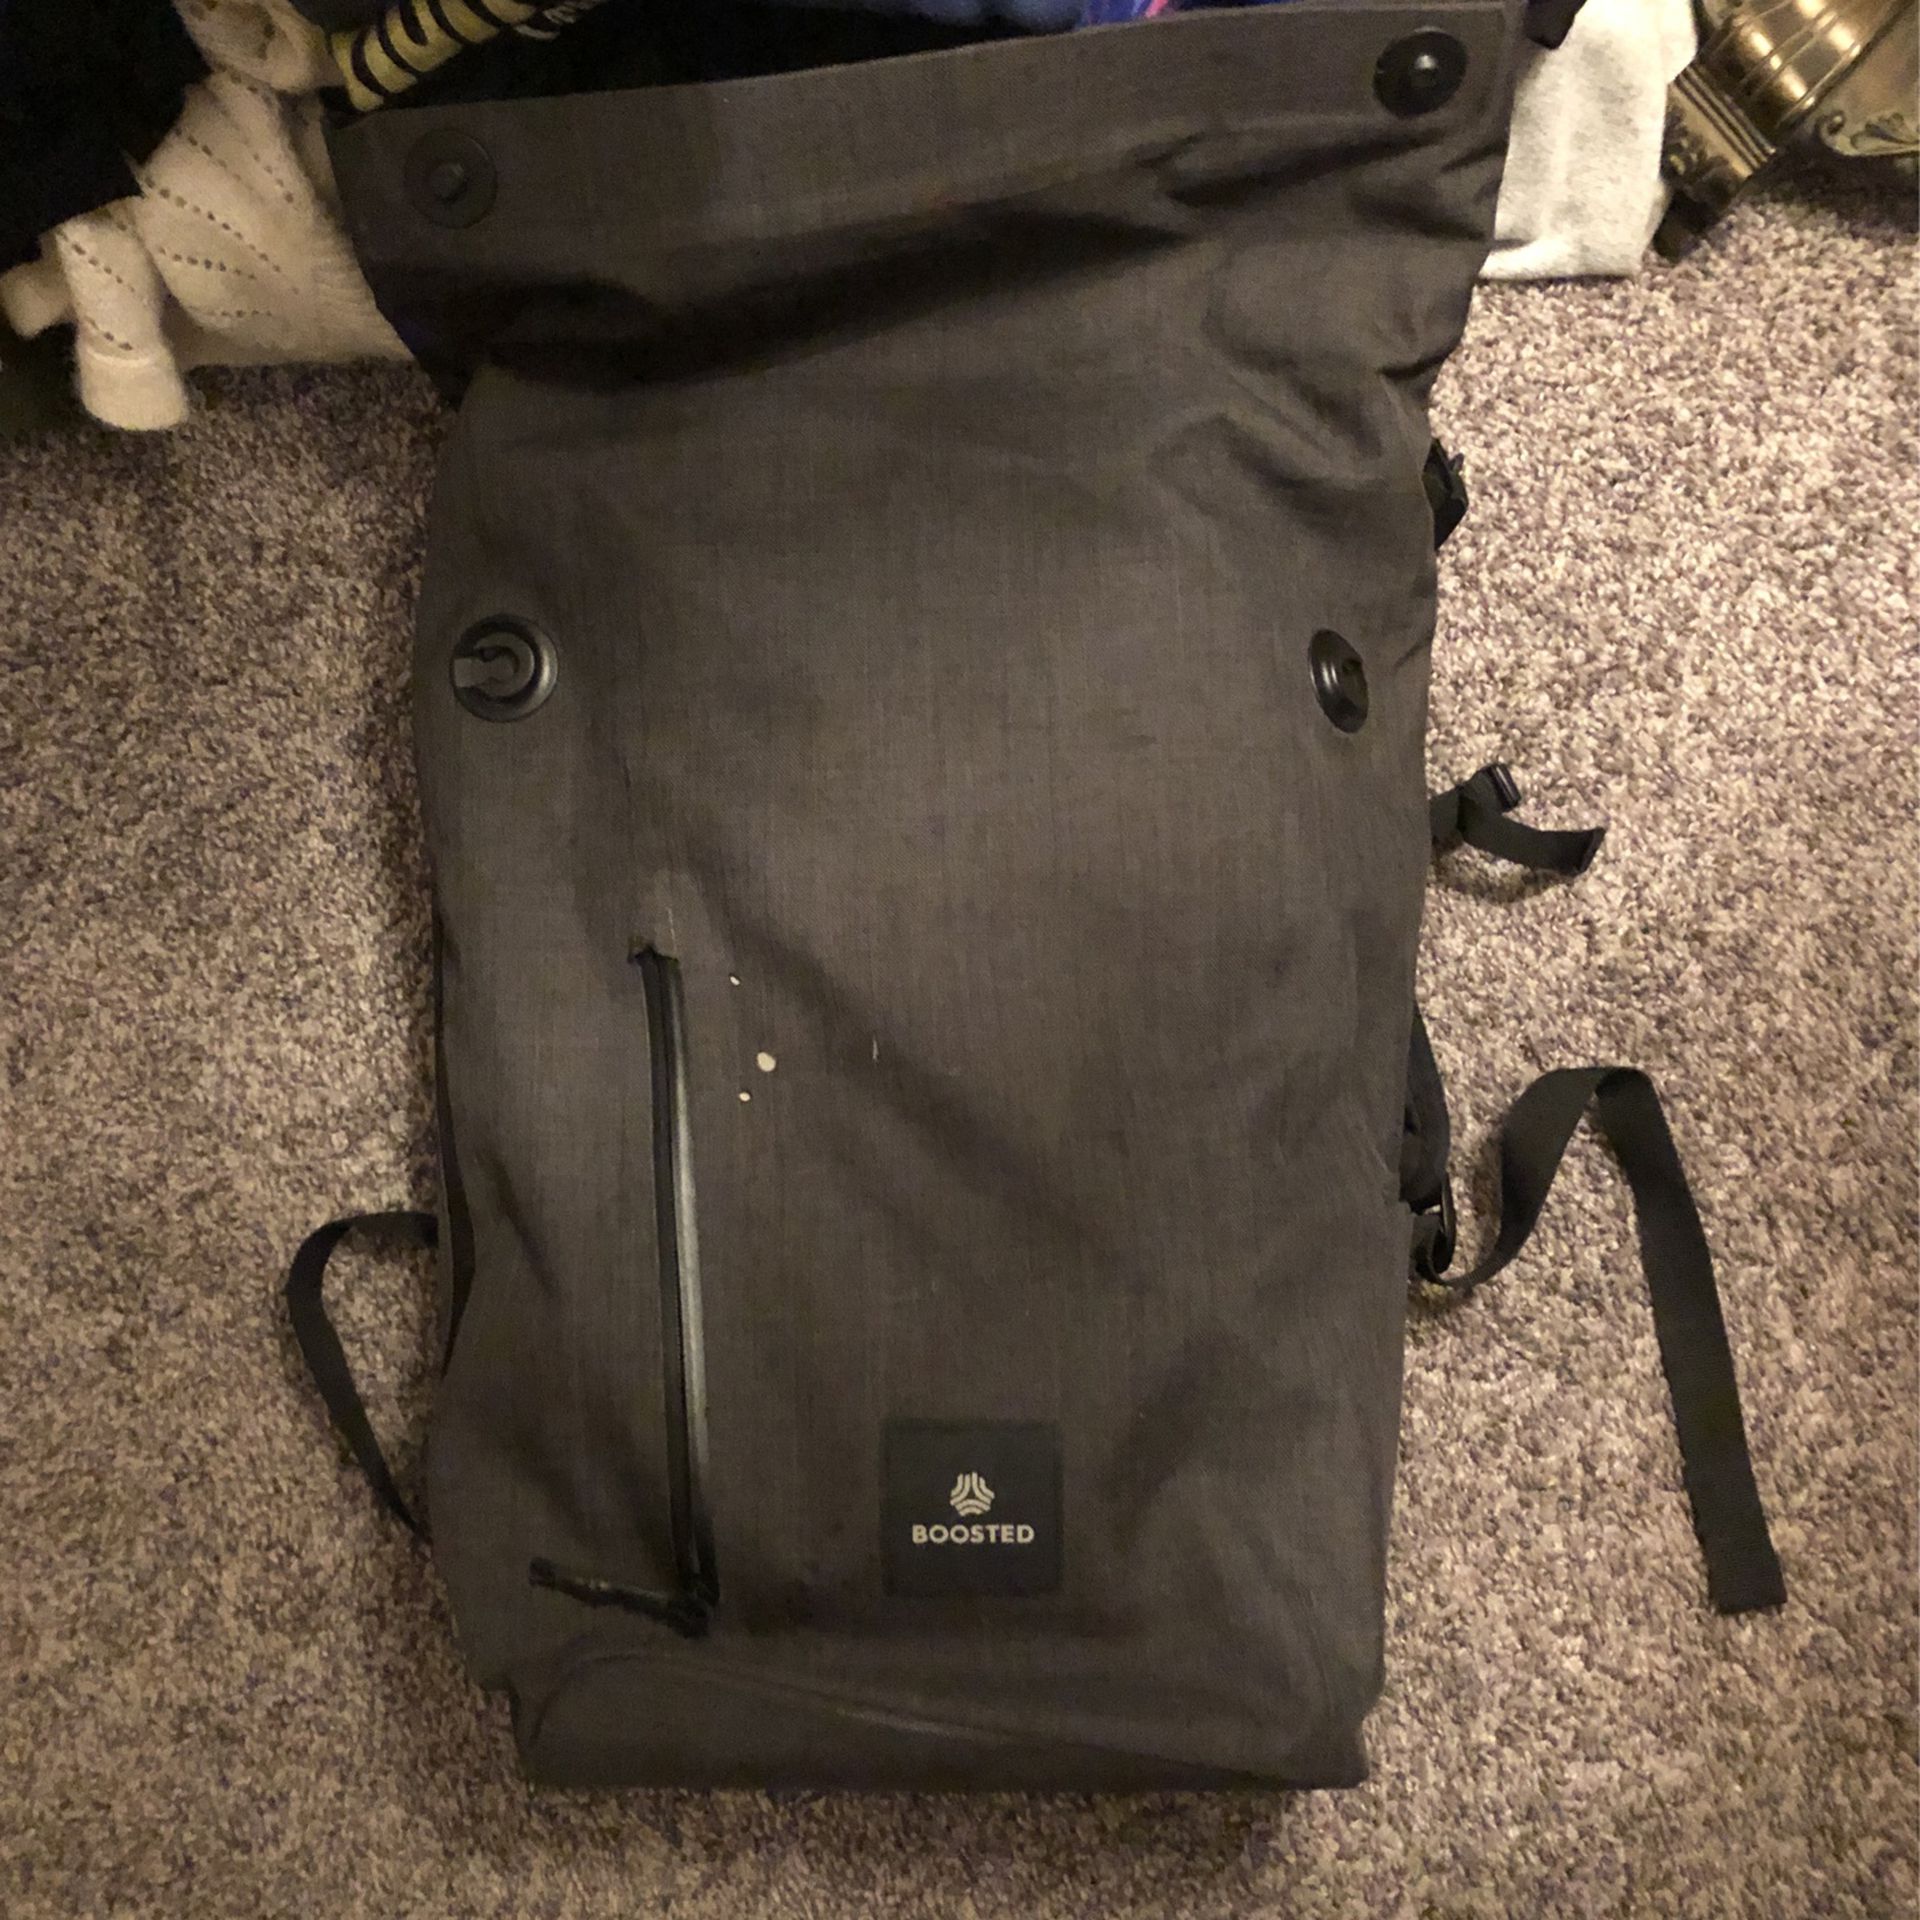 Boosted Multi Compartment Travelers Backpack For A Skateboard Or Longboard With Computer And Electronic Pockets